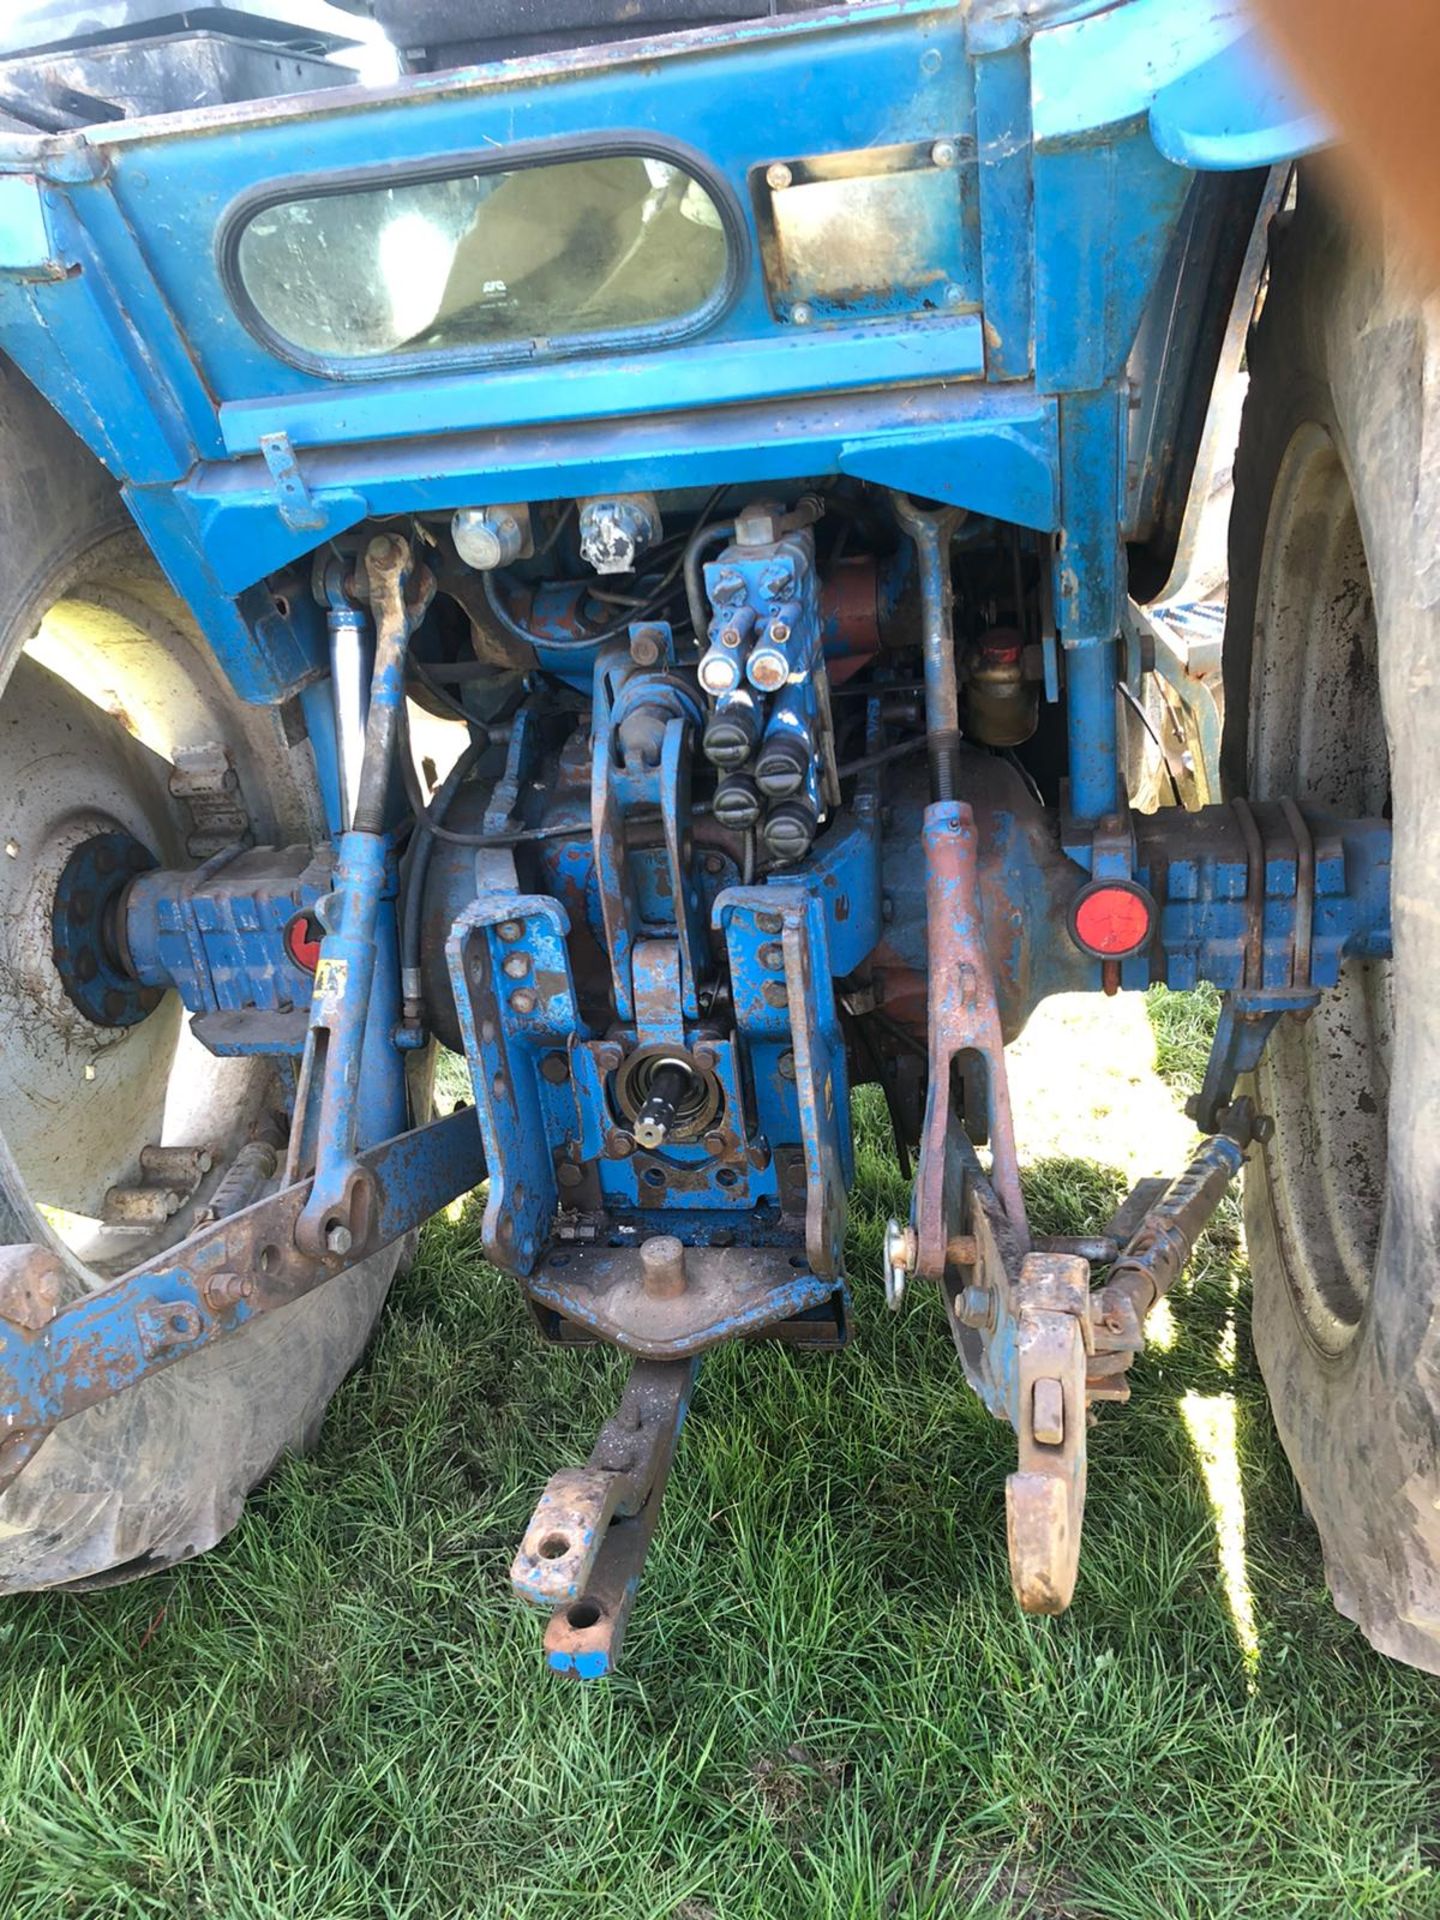 FORD 6610 4 WHEEL DRIVE TRACTOR, RUNS AND WORKS, 3 POINT LINKAGE, REAR PTO, ROAD REGISTERED WITH V5 - Image 7 of 8